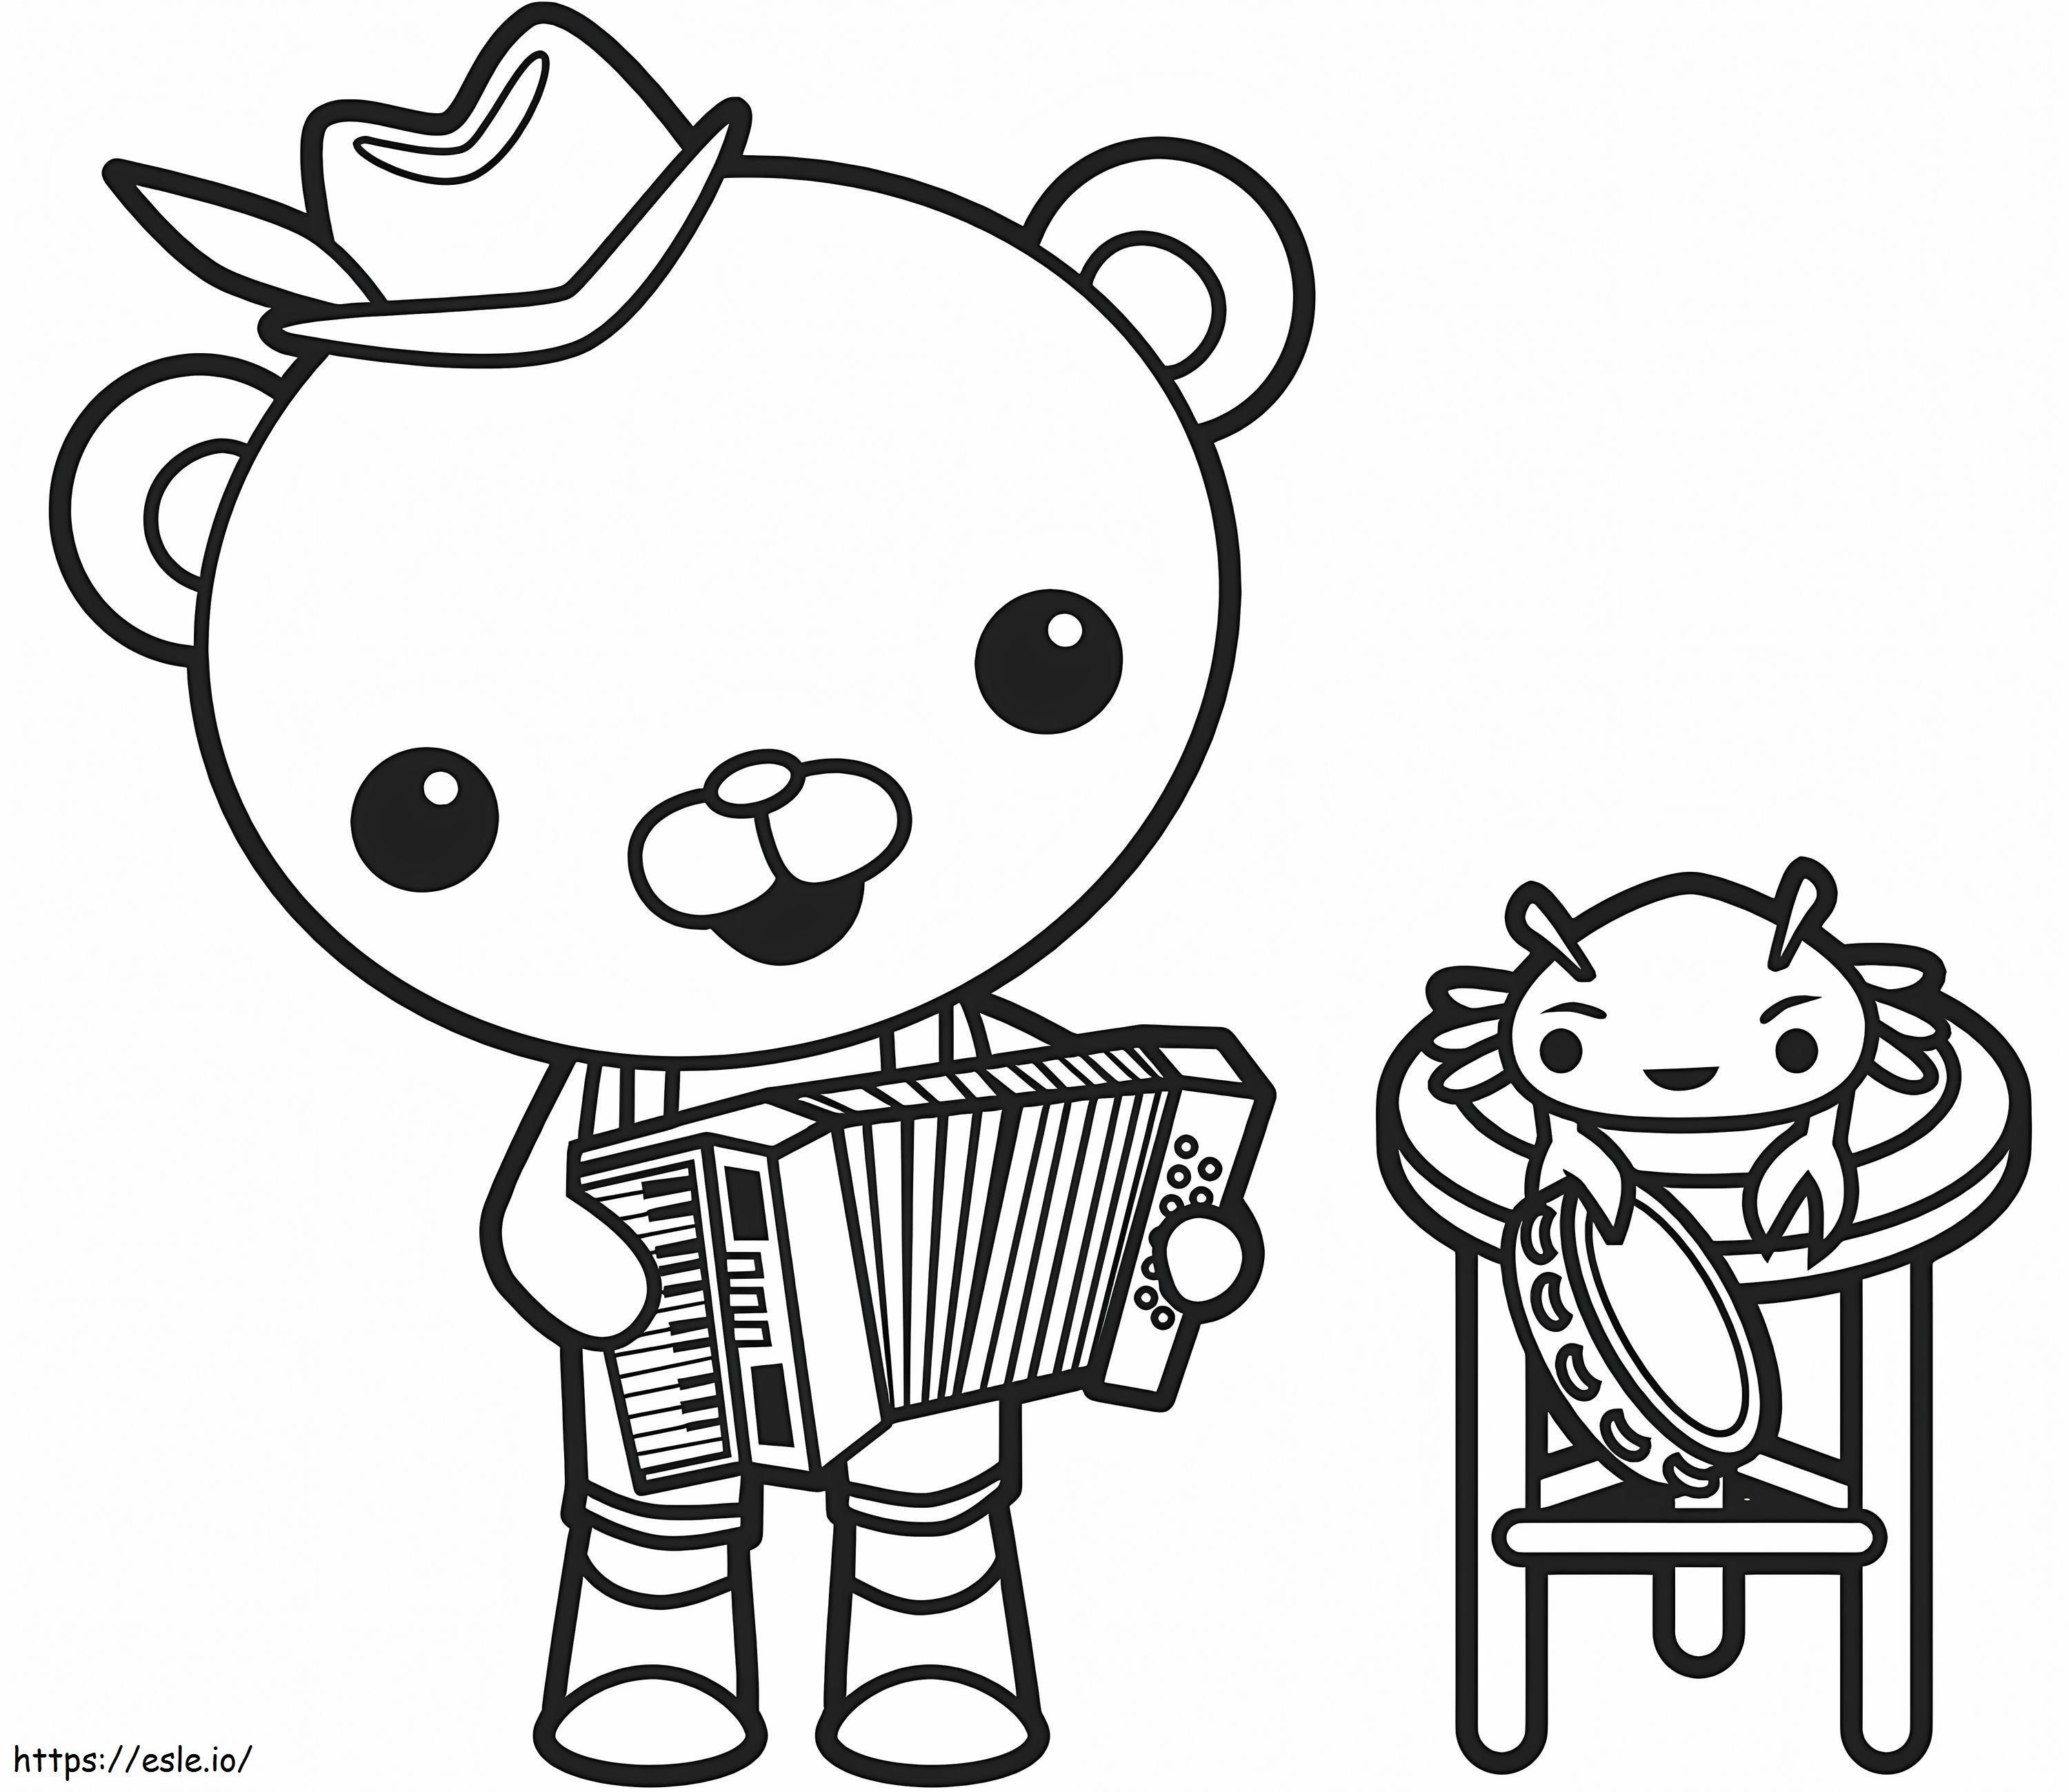 1567151111 Captain Barnacles Playing Accordion A4 E1603268396274 coloring page